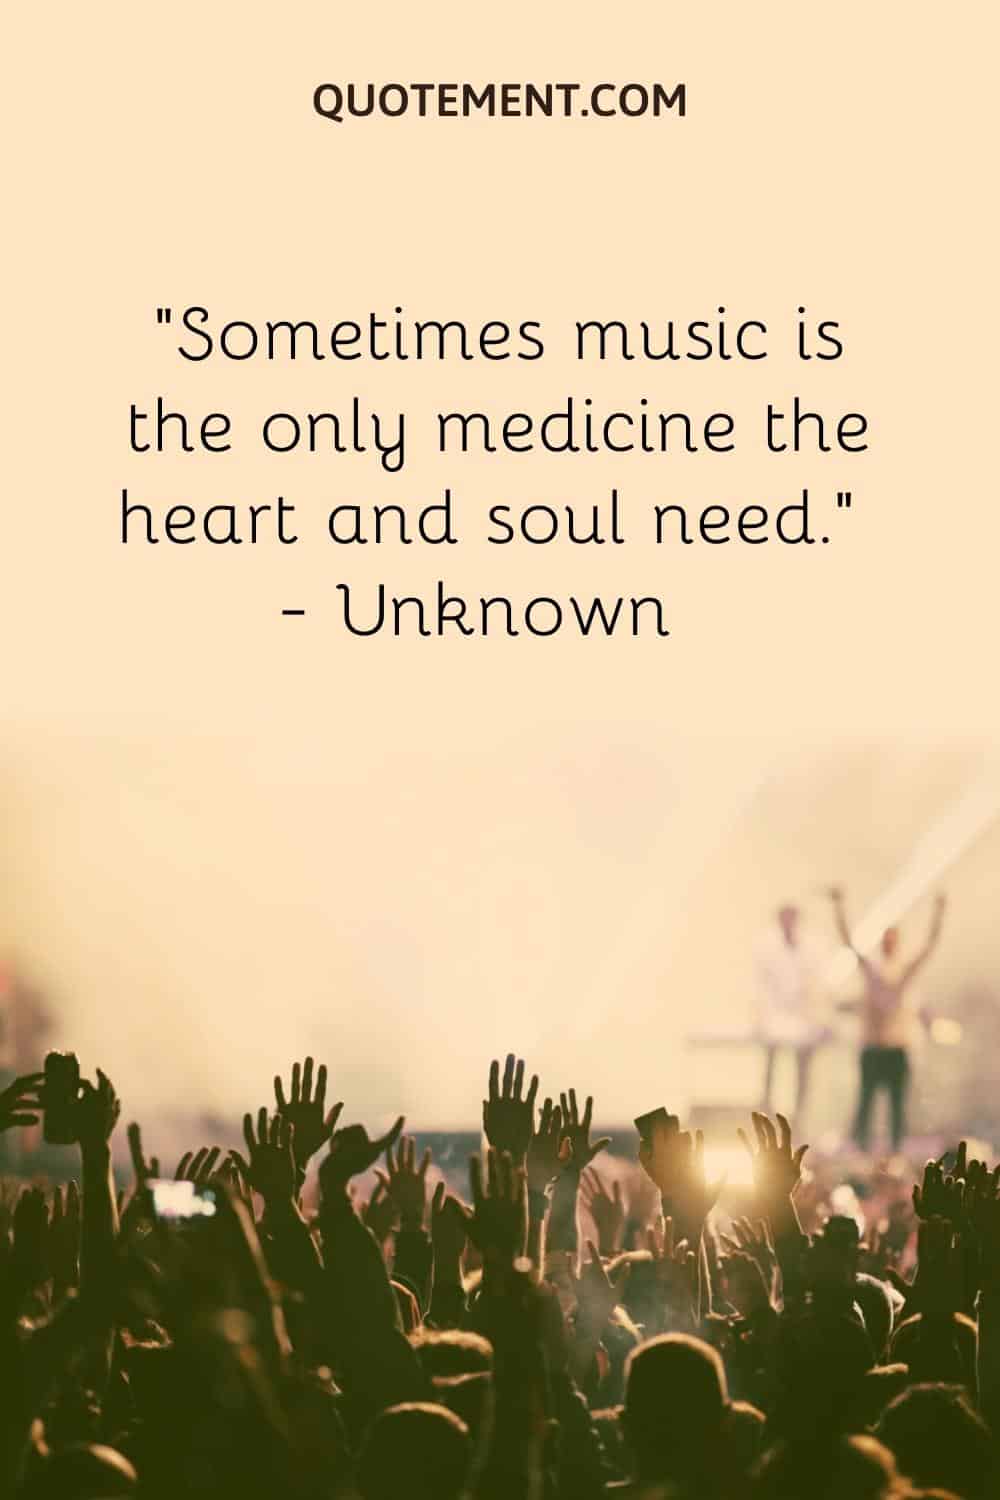 Sometimes music is the only medicine the heart and soul need